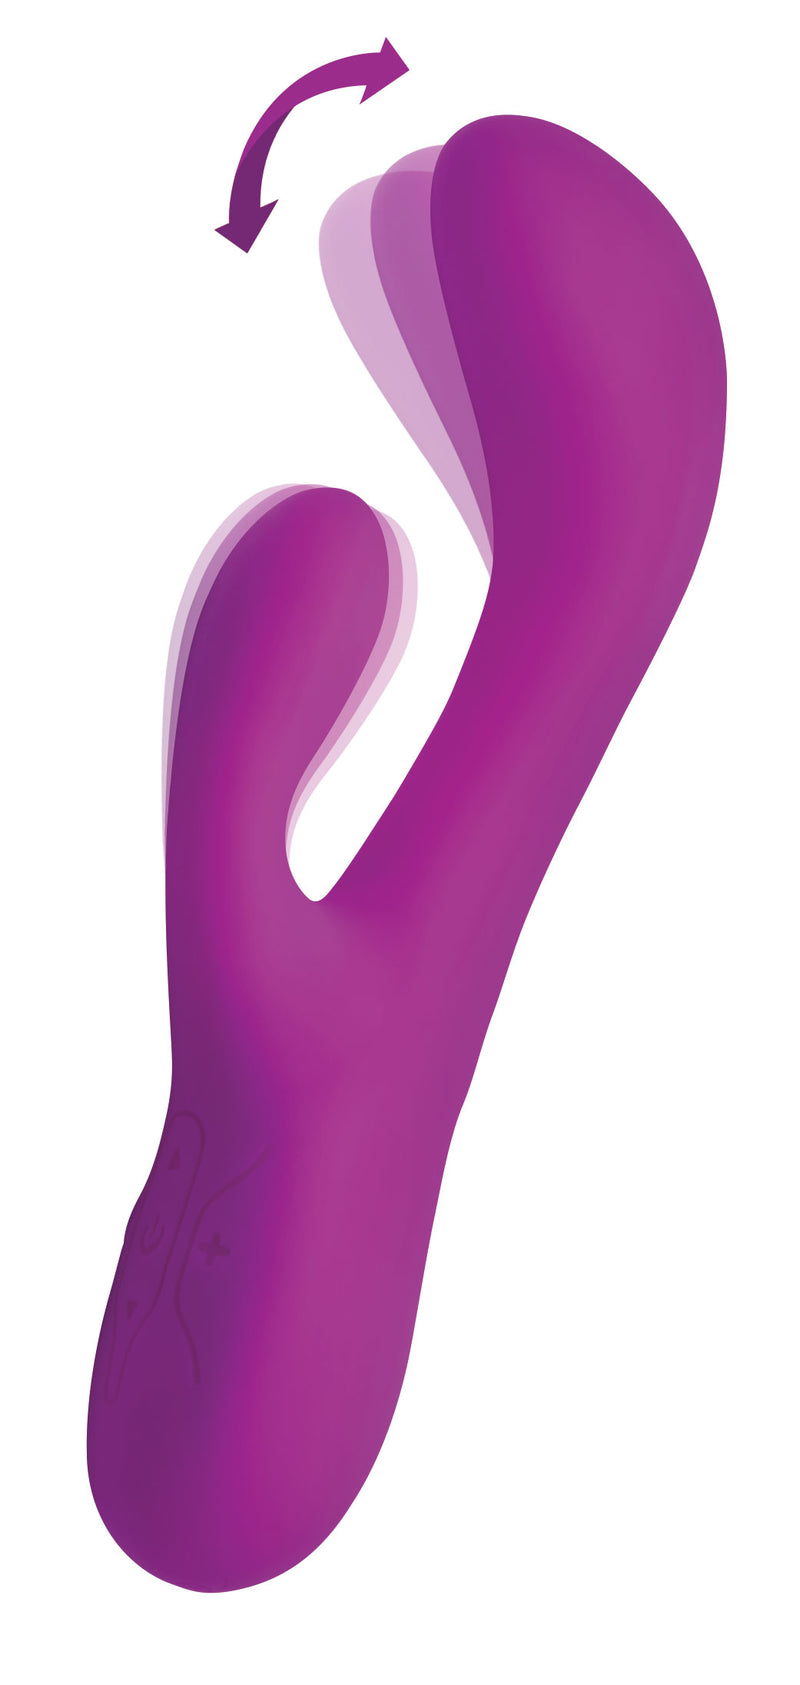 Come Hither Pro Silicone Rabbit Vibrator with Orgasmic Motion vibesextoys from Inmi